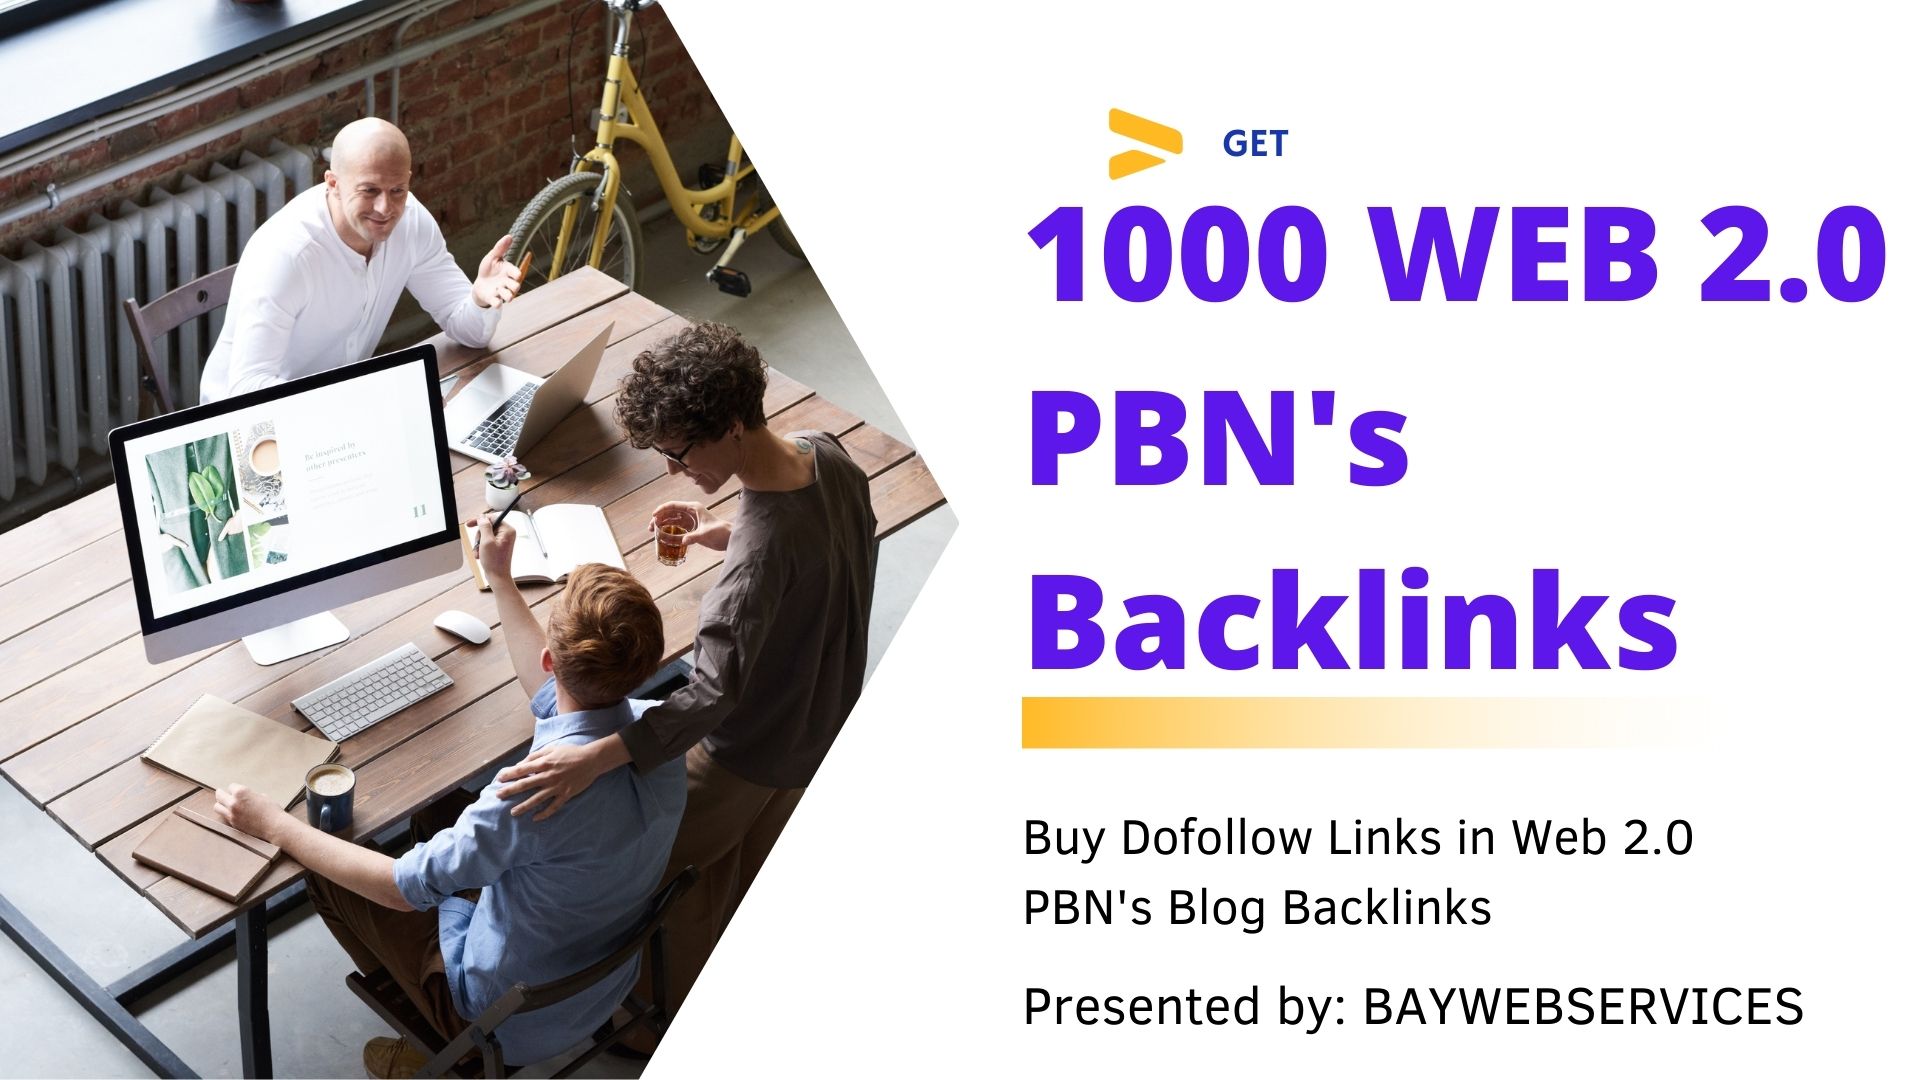 Get 1000 WEB 2.0 PBN Dofollow Contextual Link White Hat SEO for your website